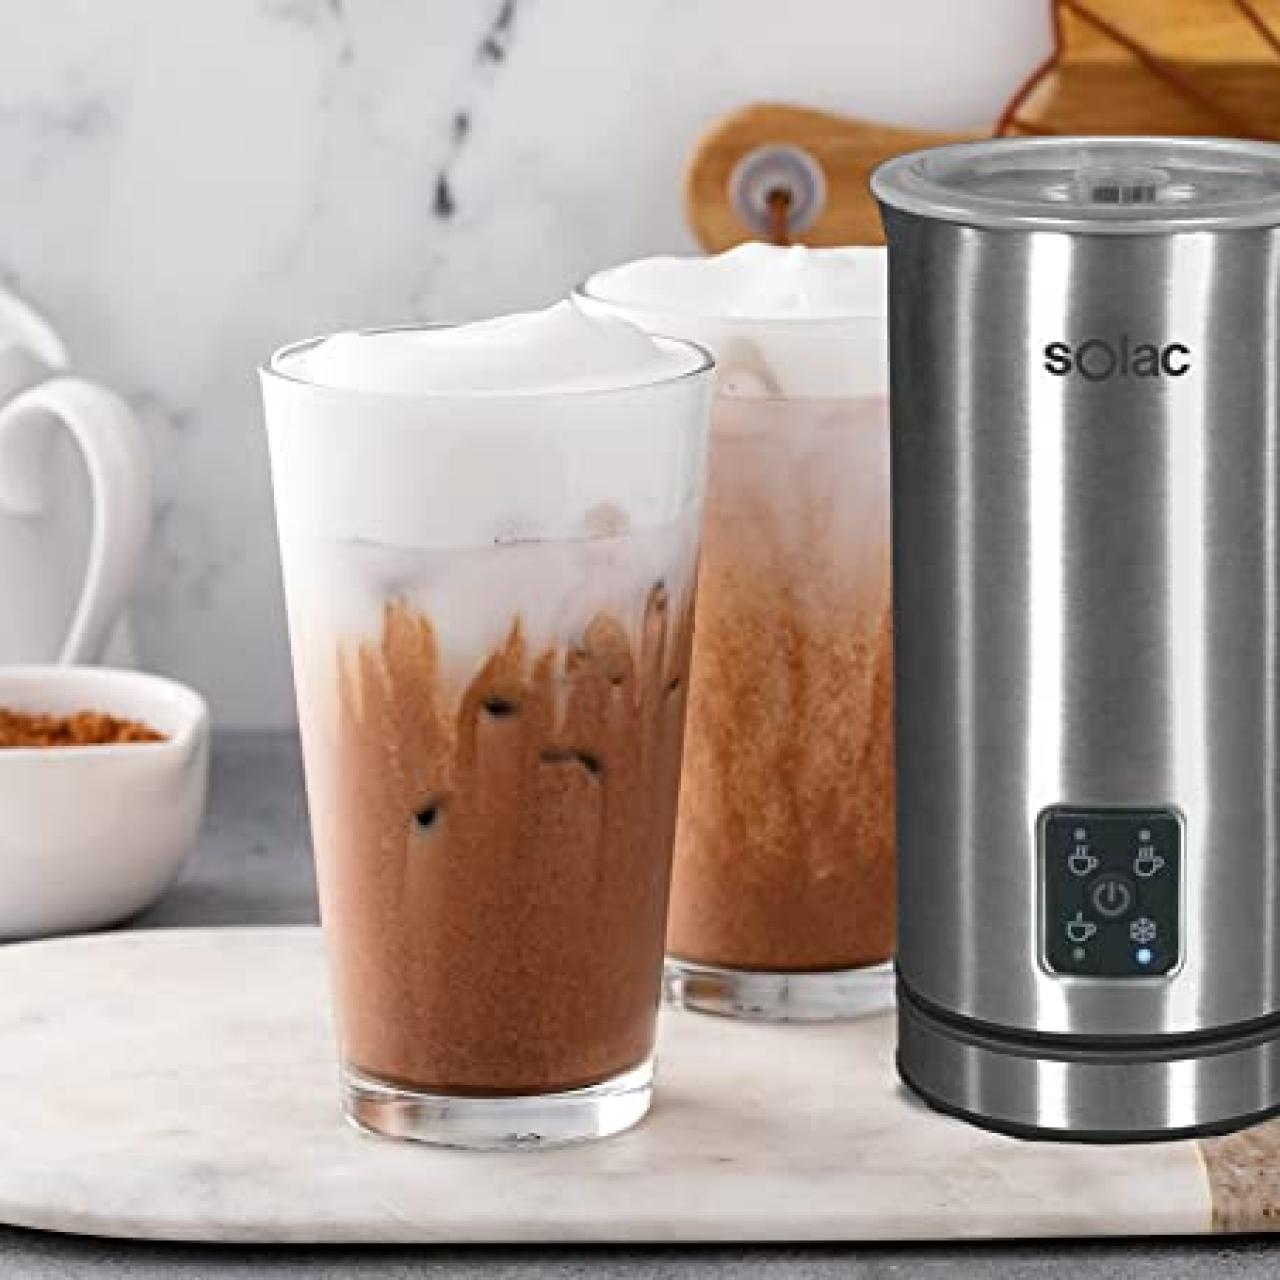 https://hgtvhome.sndimg.com/content/dam/images/hgtv/products/2023/1/13/rx_amazonsolac-pro-foam-stainless-steel-milk-frother-and-hot-chocolate-mixer.jpeg.rend.hgtvcom.1280.1280.suffix/1673631700573.jpeg